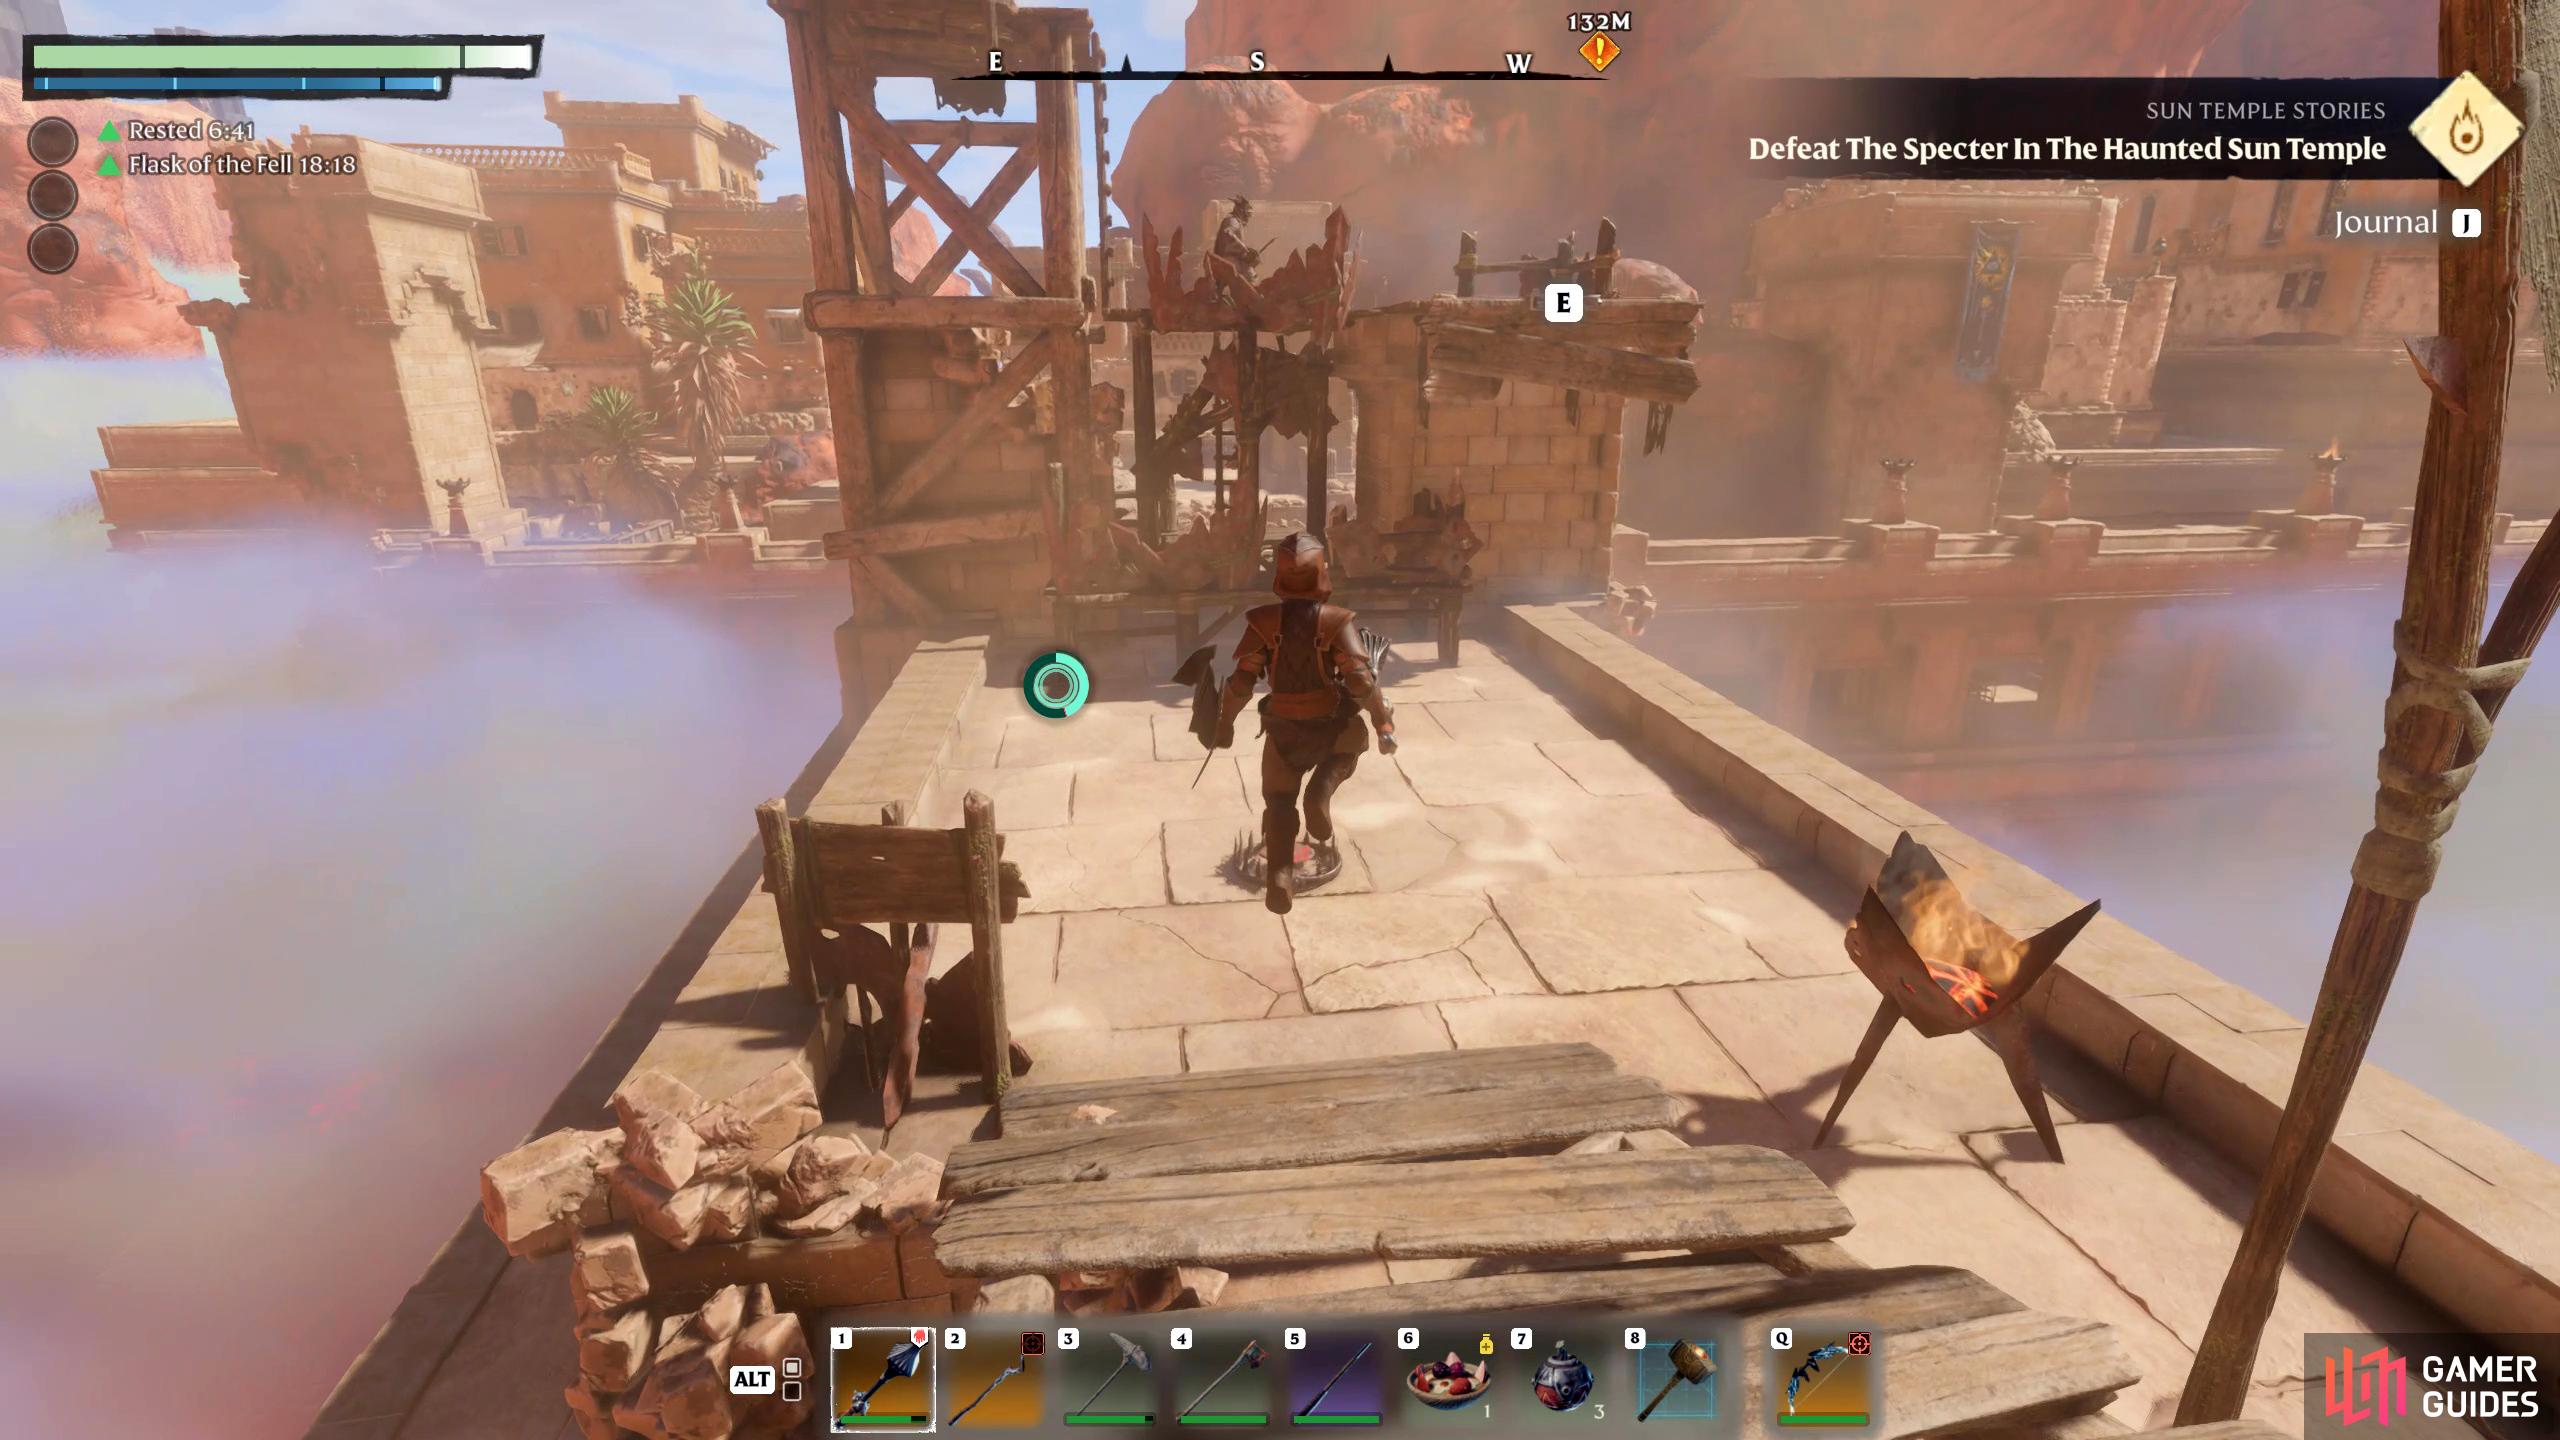 Run past the enemies, grapple over the barricade, and exit the bridge on the other side.